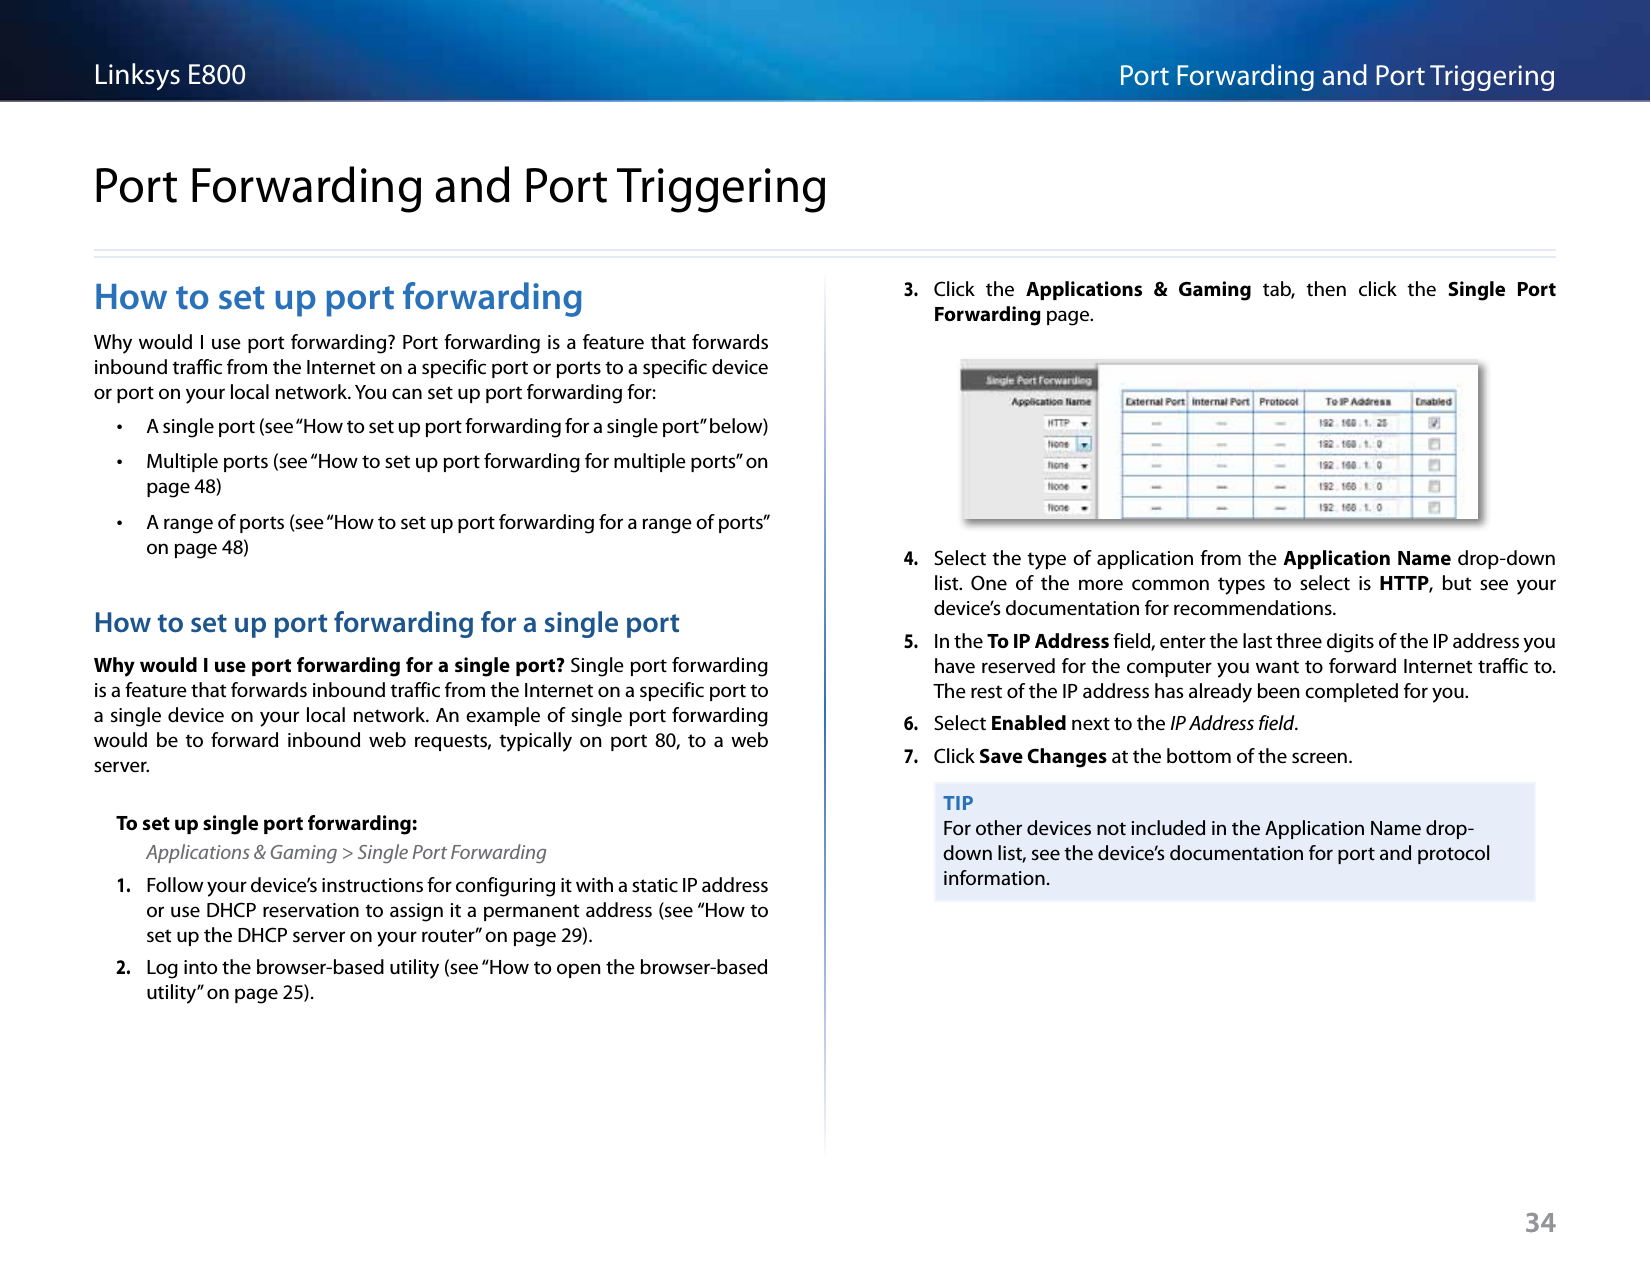 34Port Forwarding and Port TriggeringLinksys E80034How to set up port forwardingWhy would I use port forwarding? Port forwarding is a feature that forwards inbound traffic from the Internet on a specific port or ports to a specific device or port on your local network. You can set up port forwarding for: •A single port (see “How to set up port forwarding for a single port” below) •Multiple ports (see “How to set up port forwarding for multiple ports” on page 48) •A range of ports (see “How to set up port forwarding for a range of ports” on page 48)How to set up port forwarding for a single portWhy would I use port forwarding for a single port? Single port forwarding is a feature that forwards inbound traffic from the Internet on a specific port to a single device on your local network. An example of single port forwarding would  be  to  forward  inbound  web  requests,  typically  on  port  80,  to  a  web server. To set up single port forwarding:Applications &amp; Gaming &gt; Single Port Forwarding1. Follow your device’s instructions for configuring it with a static IP address or use DHCP reservation to assign it a permanent address (see “How to set up the DHCP server on your router” on page 29).2. Log into the browser-based utility (see “How to open the browser-based utility” on page 25). 3. Click  the  Applications  &amp;  Gaming  tab,  then  click  the  Single  Port Forwarding page.4. Select the type of application from the Application Name drop-down list.  One  of  the  more  common  types  to  select  is  HTTP,  but  see  your device’s documentation for recommendations. 5. In the To IP Address field, enter the last three digits of the IP address you have reserved for the computer you want to forward Internet traffic to. The rest of the IP address has already been completed for you. 6. Select Enabled next to the IP Address field.7. Click Save Changes at the bottom of the screen.TIPFor other devices not included in the Application Name drop-down list, see the device’s documentation for port and protocol information.Port Forwarding and Port Triggering